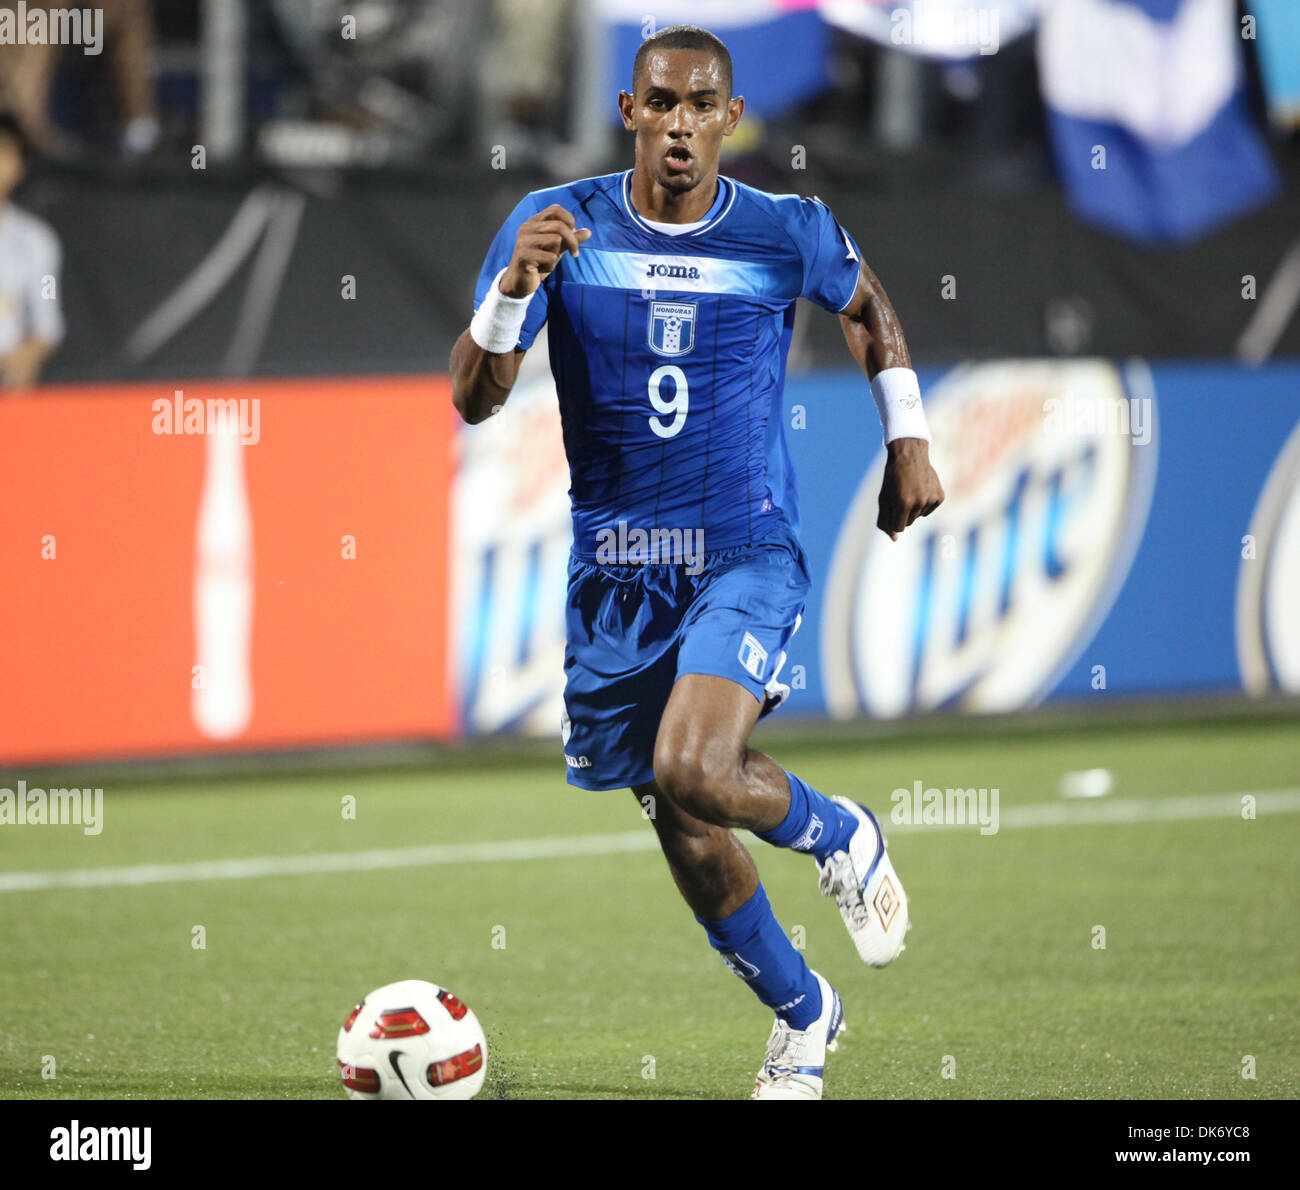 June 10, 2011 - Fort Lauderdale, Florida, U.S - Honduras forward Jerry Bengtson #9 in action during the 2011 CONCACAF Gold Cup game  at FIU Stadium in Miami, Florida.Honduras defeated Grenada with score of 7-1. (Credit Image: © Luis Blanco/Southcreek Global/ZUMApress.com) Stock Photo